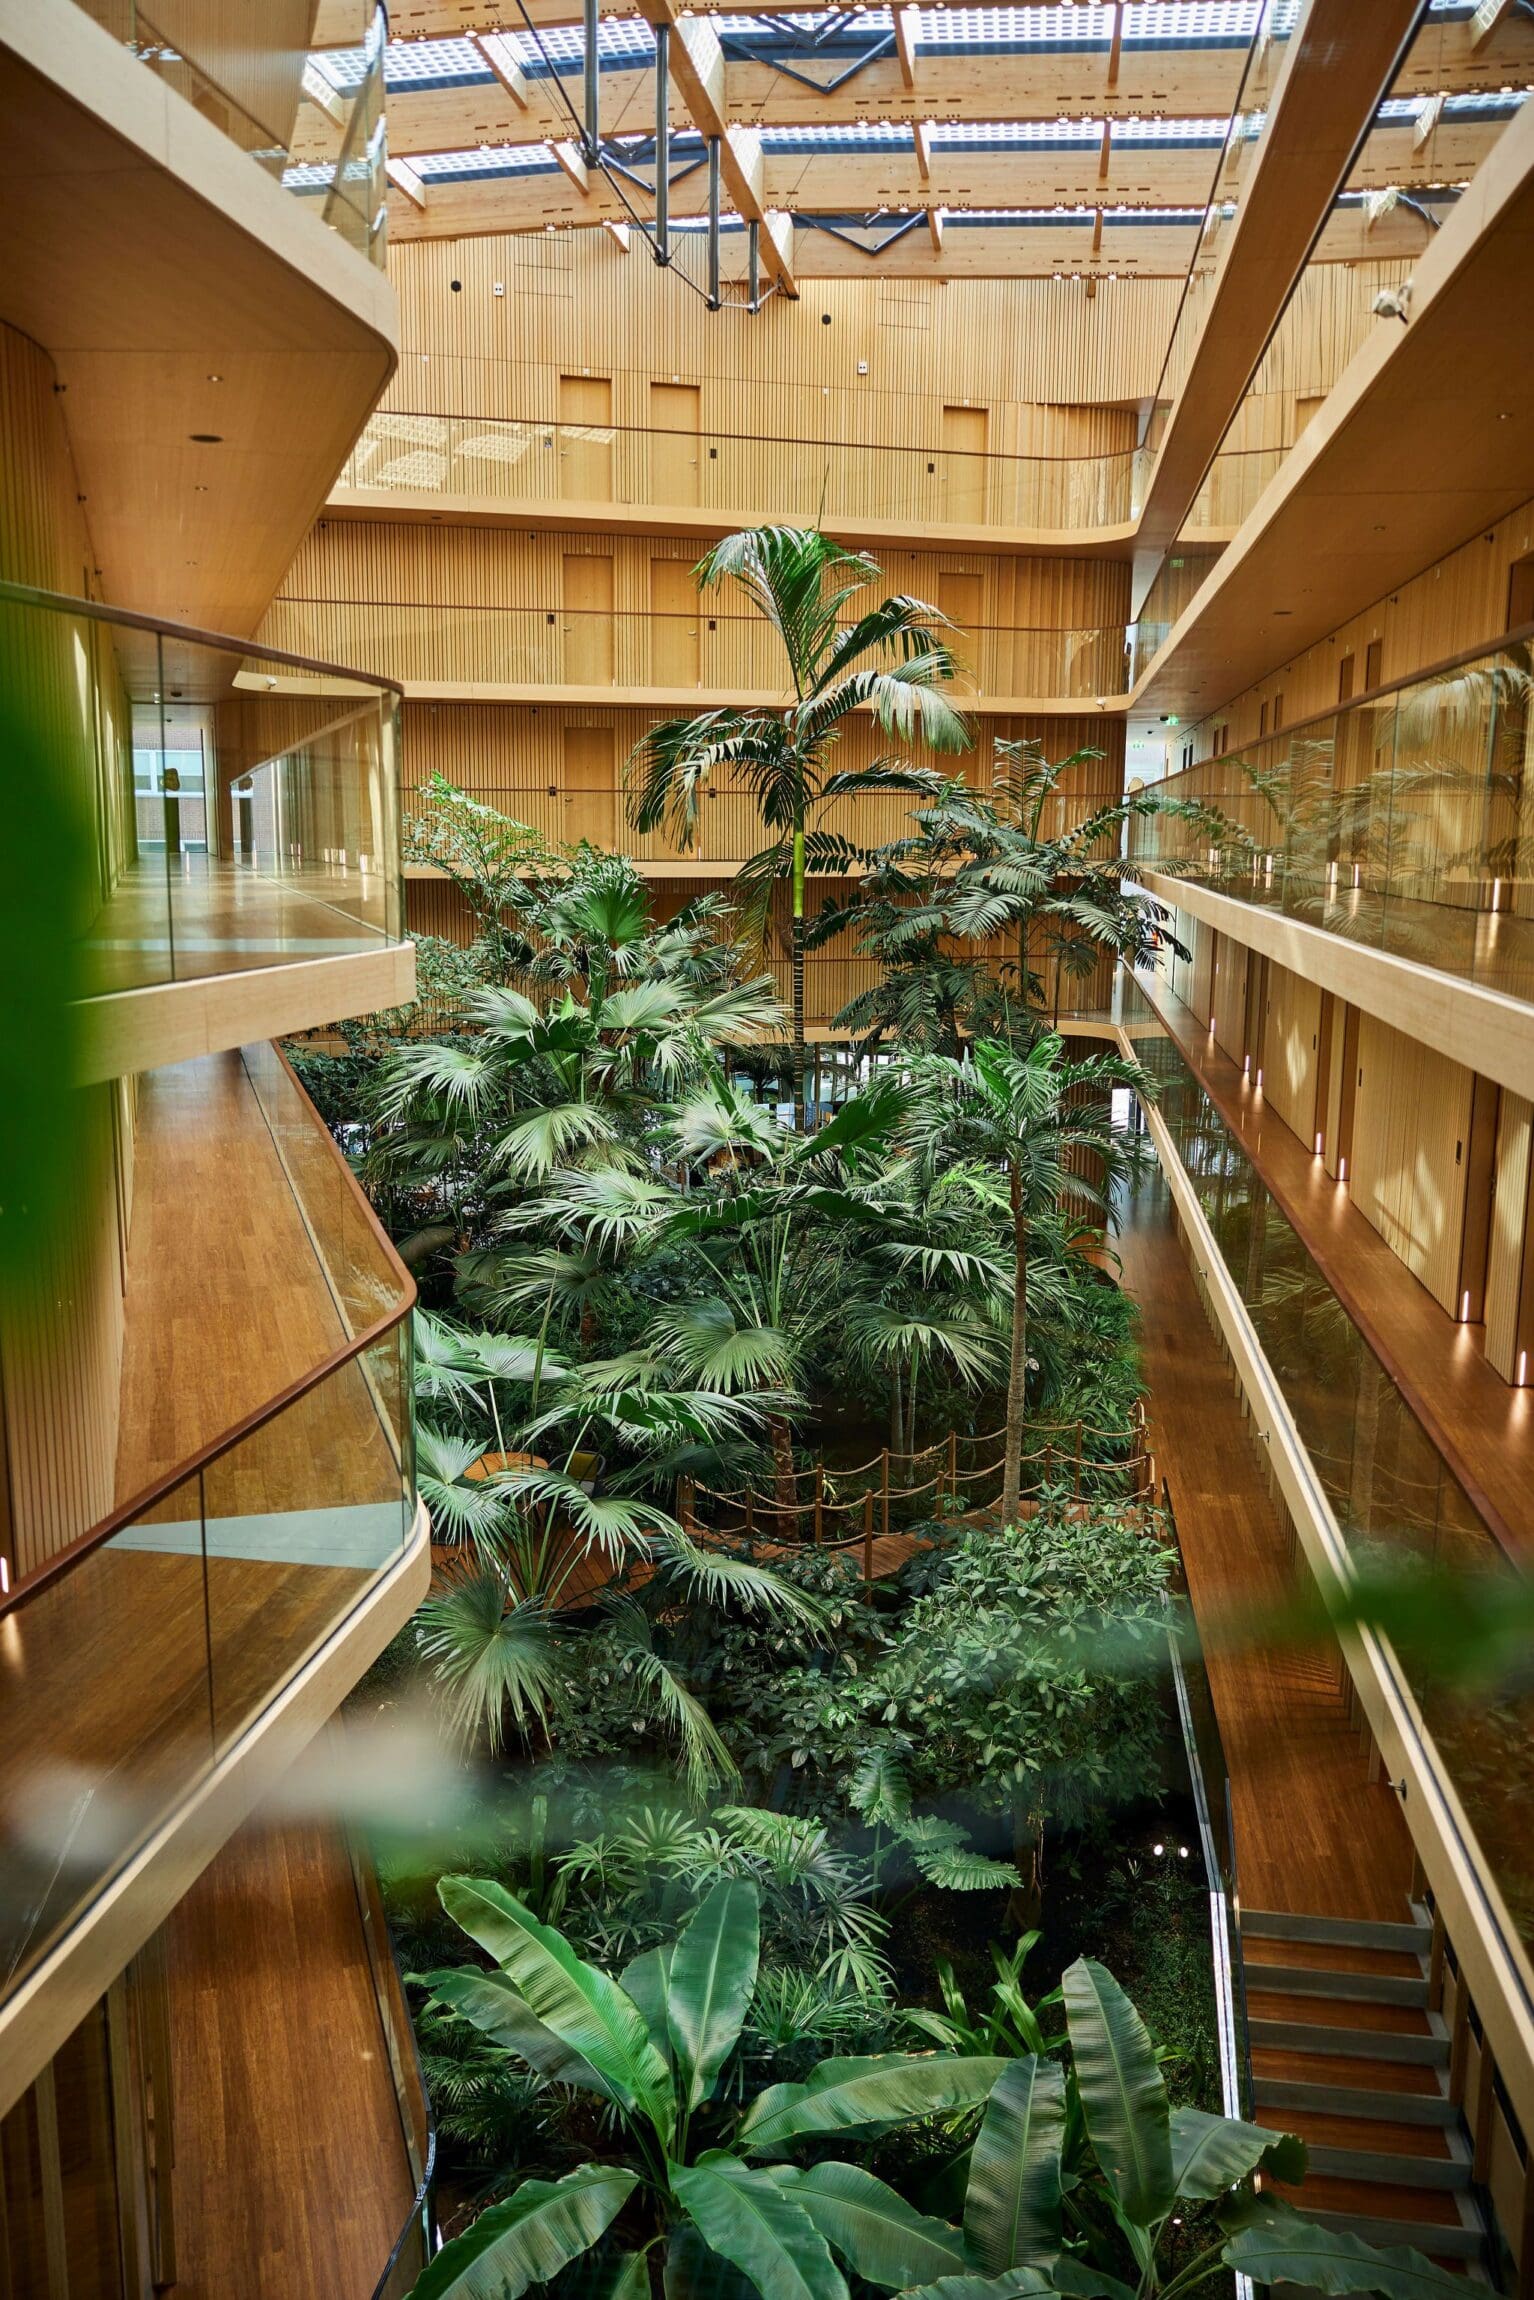 The best hotels in Amsterdam | This wood panelled hotel has a large array of plants growing through the entire building.